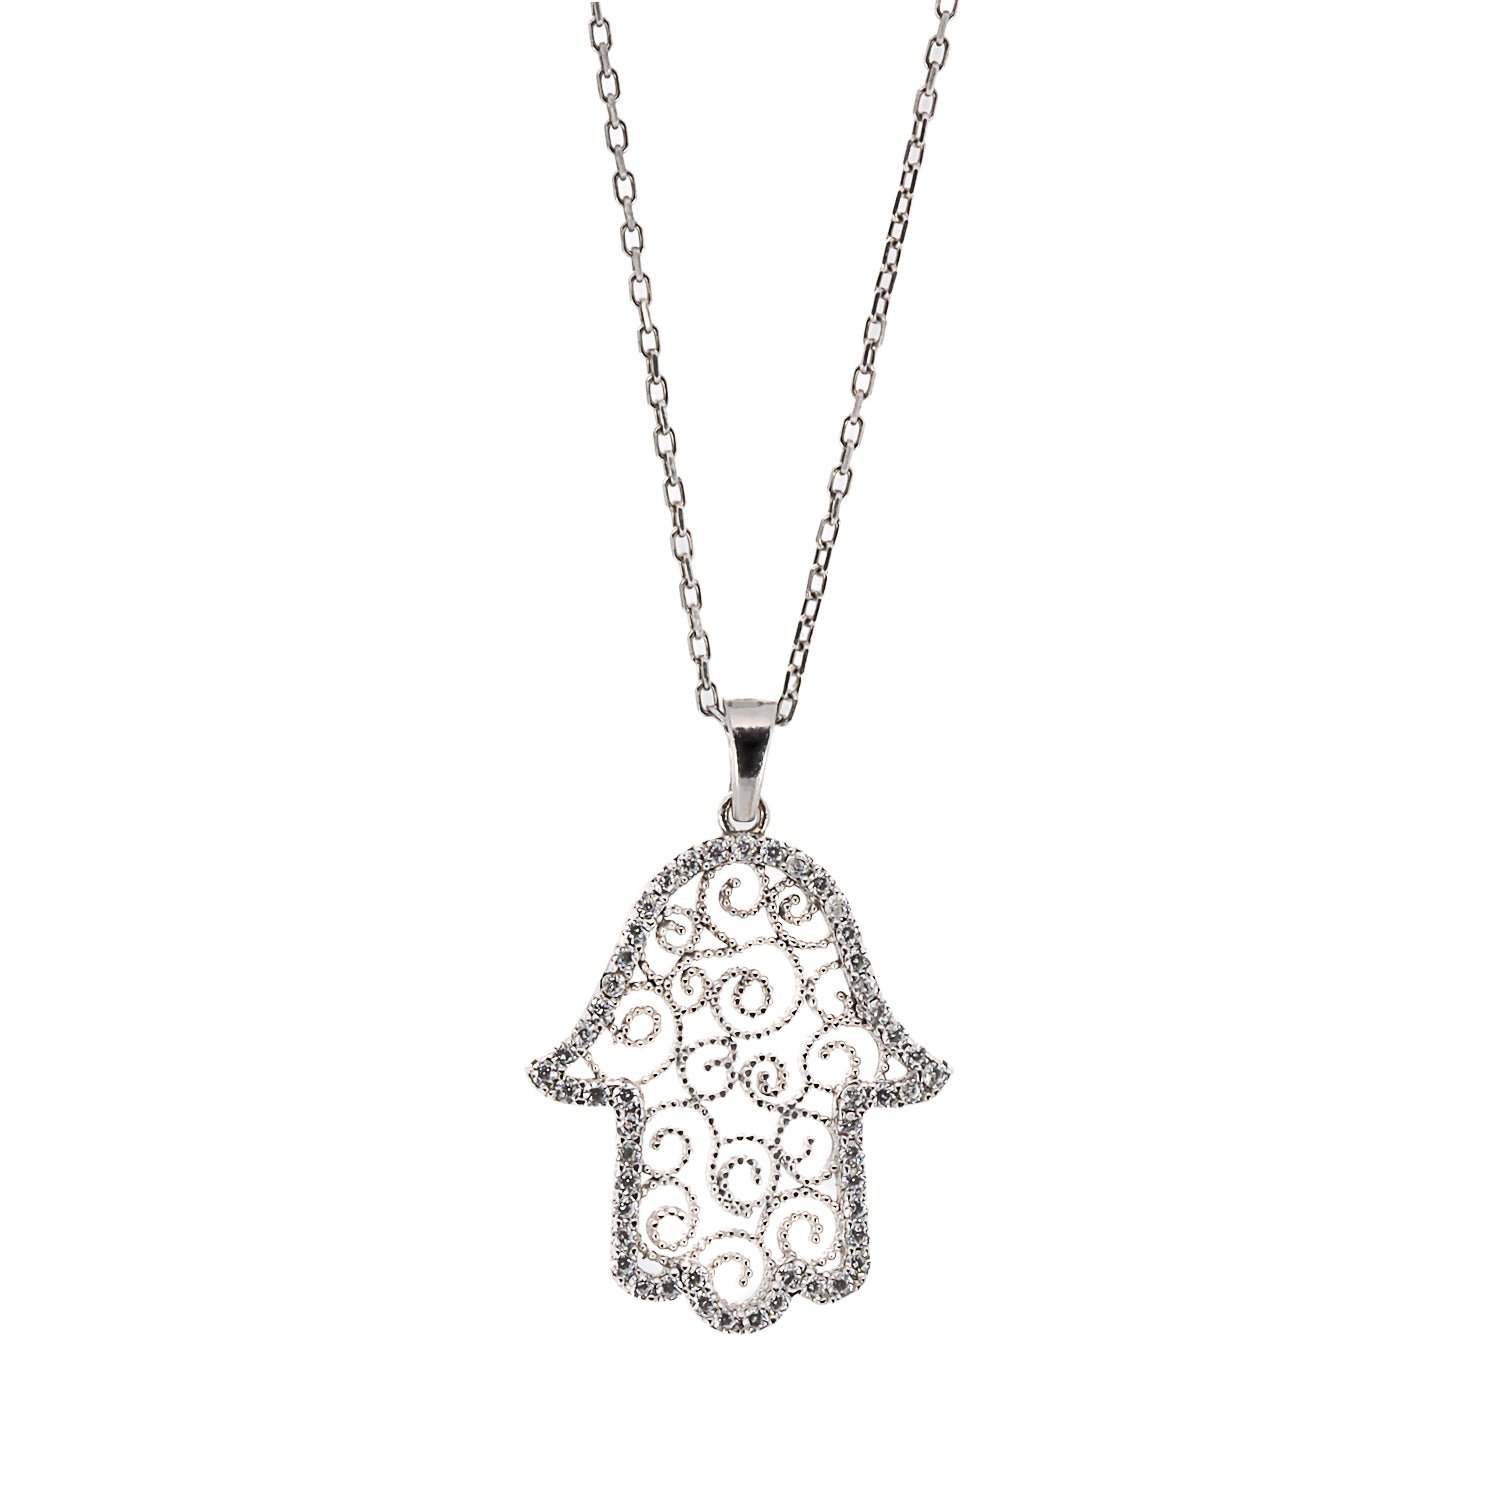 Discover the symbolism and beauty of the Spiral Hamsa Necklace, a handmade piece crafted with high-quality sterling silver and sparkling CZ diamonds, representing protection and blessings.